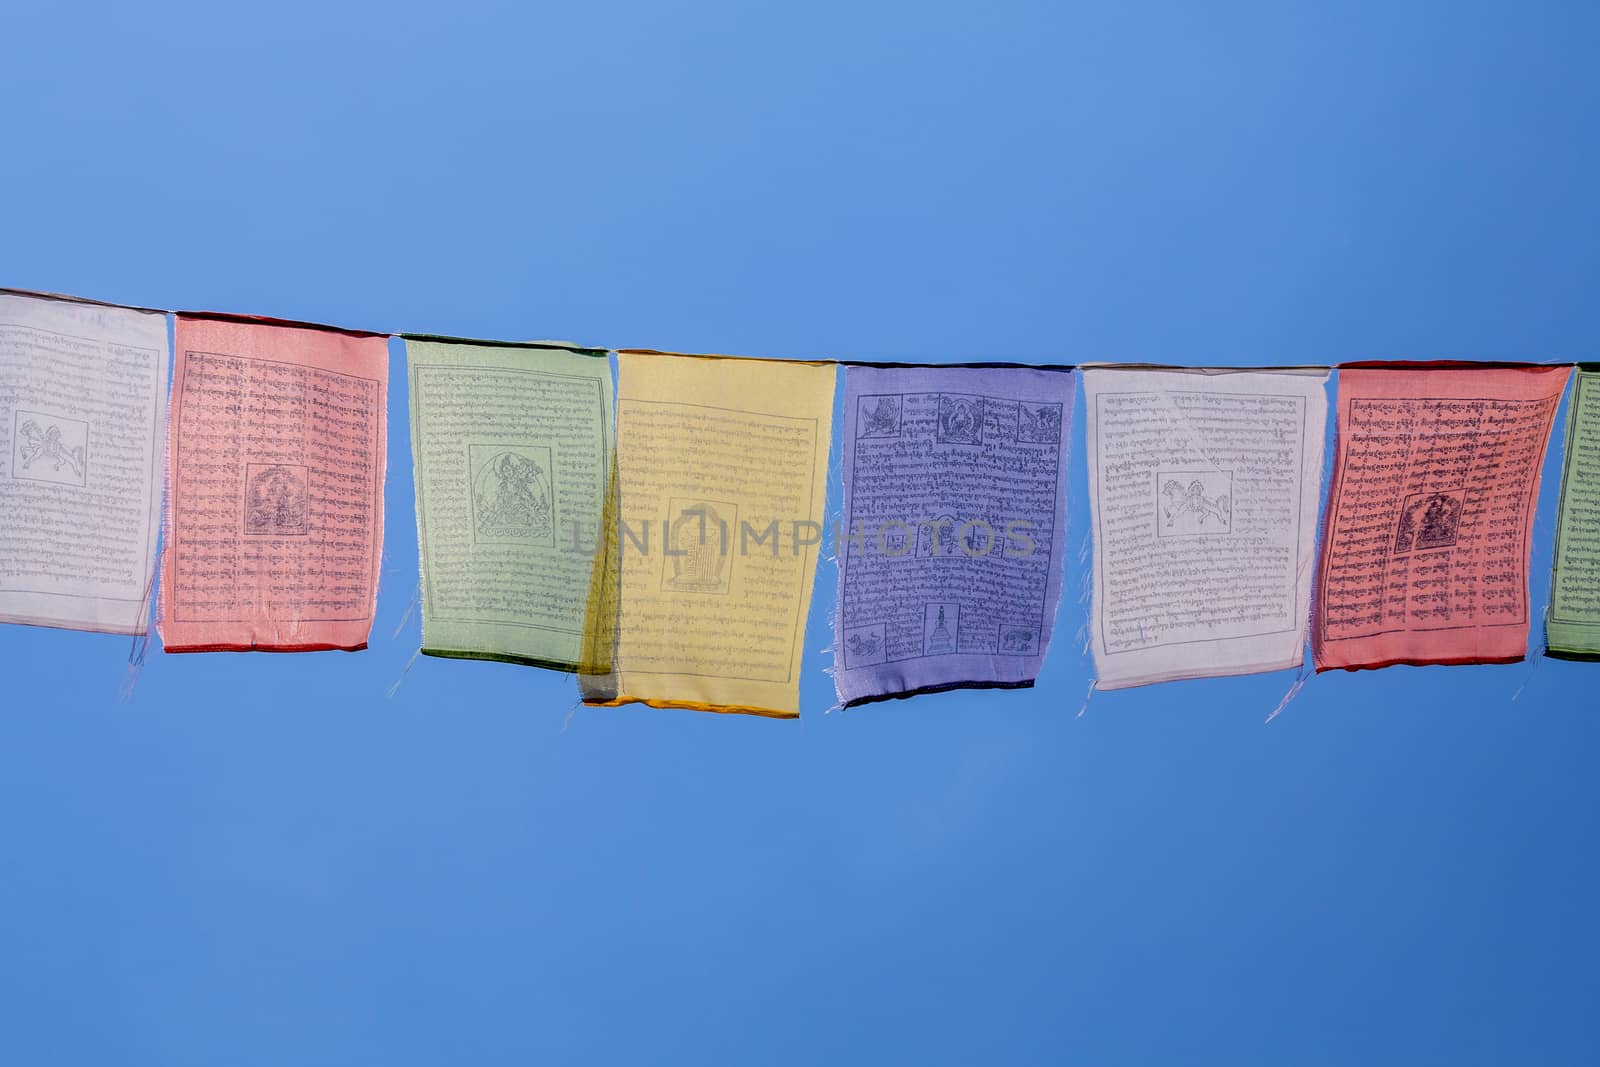 Buddhist prayer flags the holy traditional flag in Bhutan by kerdkanno